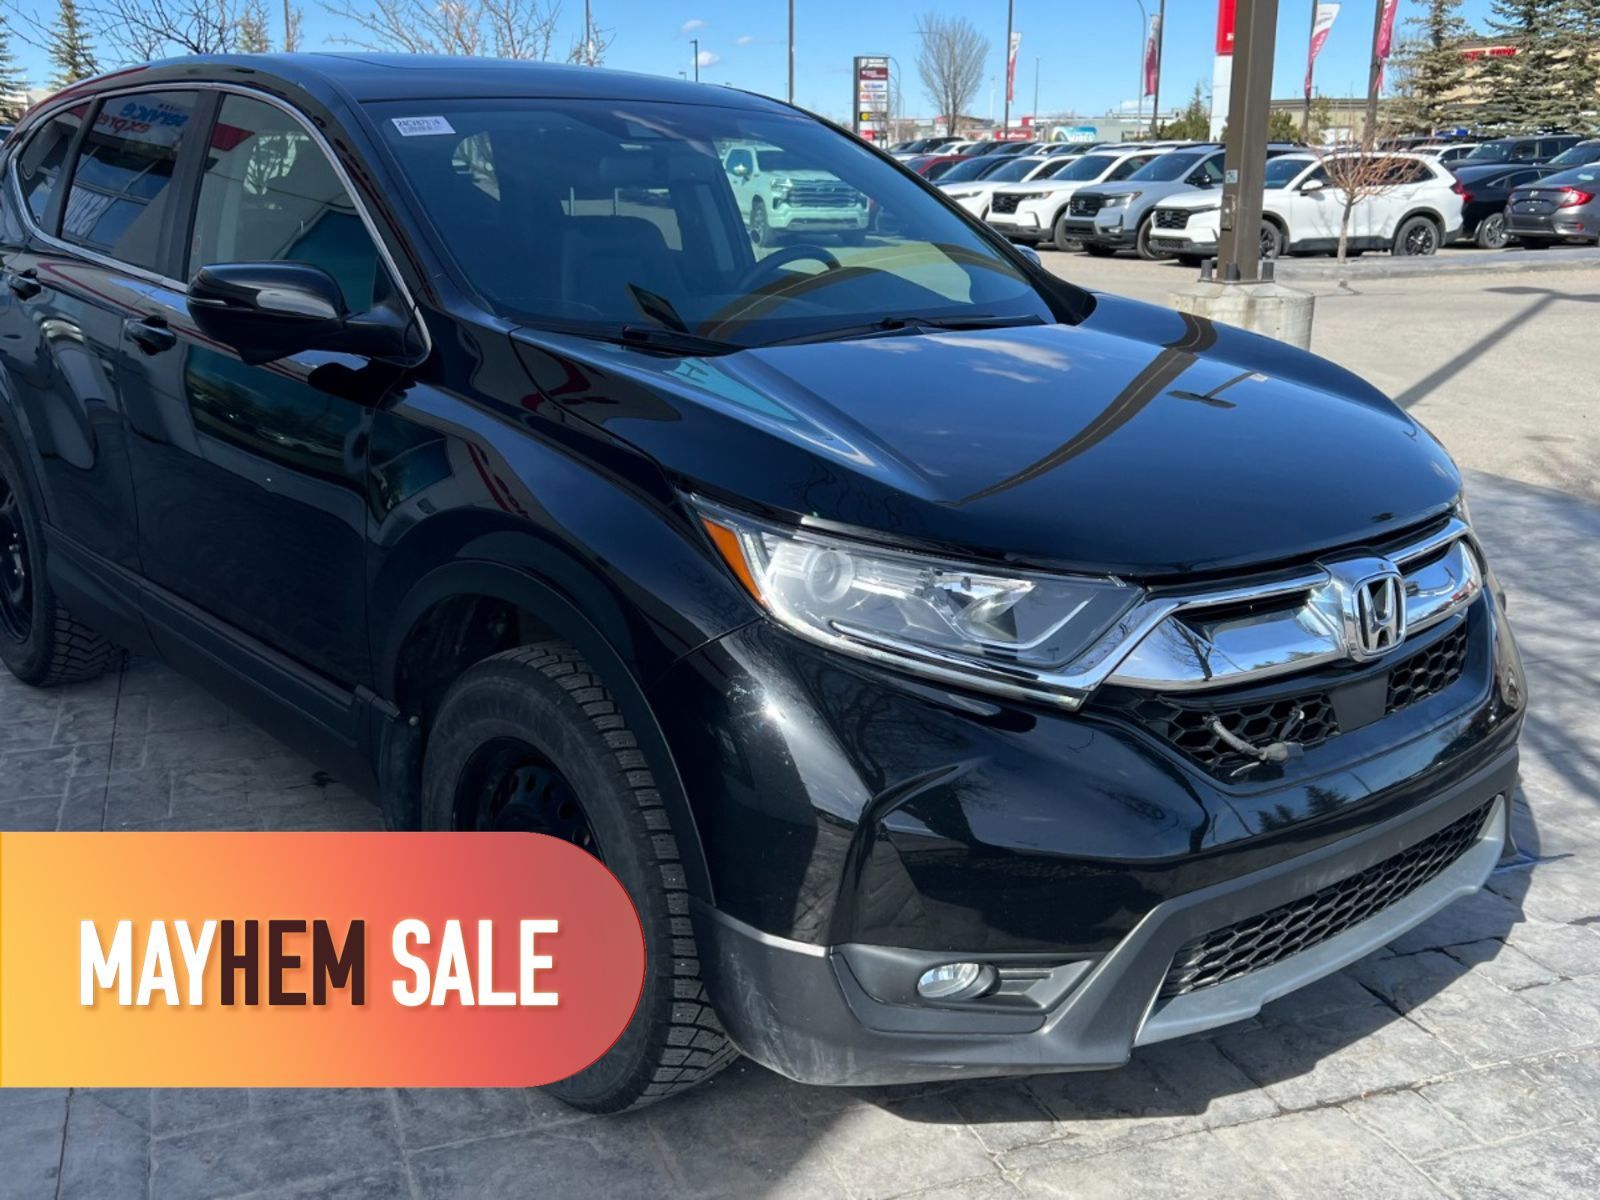 2018 Honda CR-V EX-L - NO ACCIDENTS, ONE OWNER, HEATED WHEEL